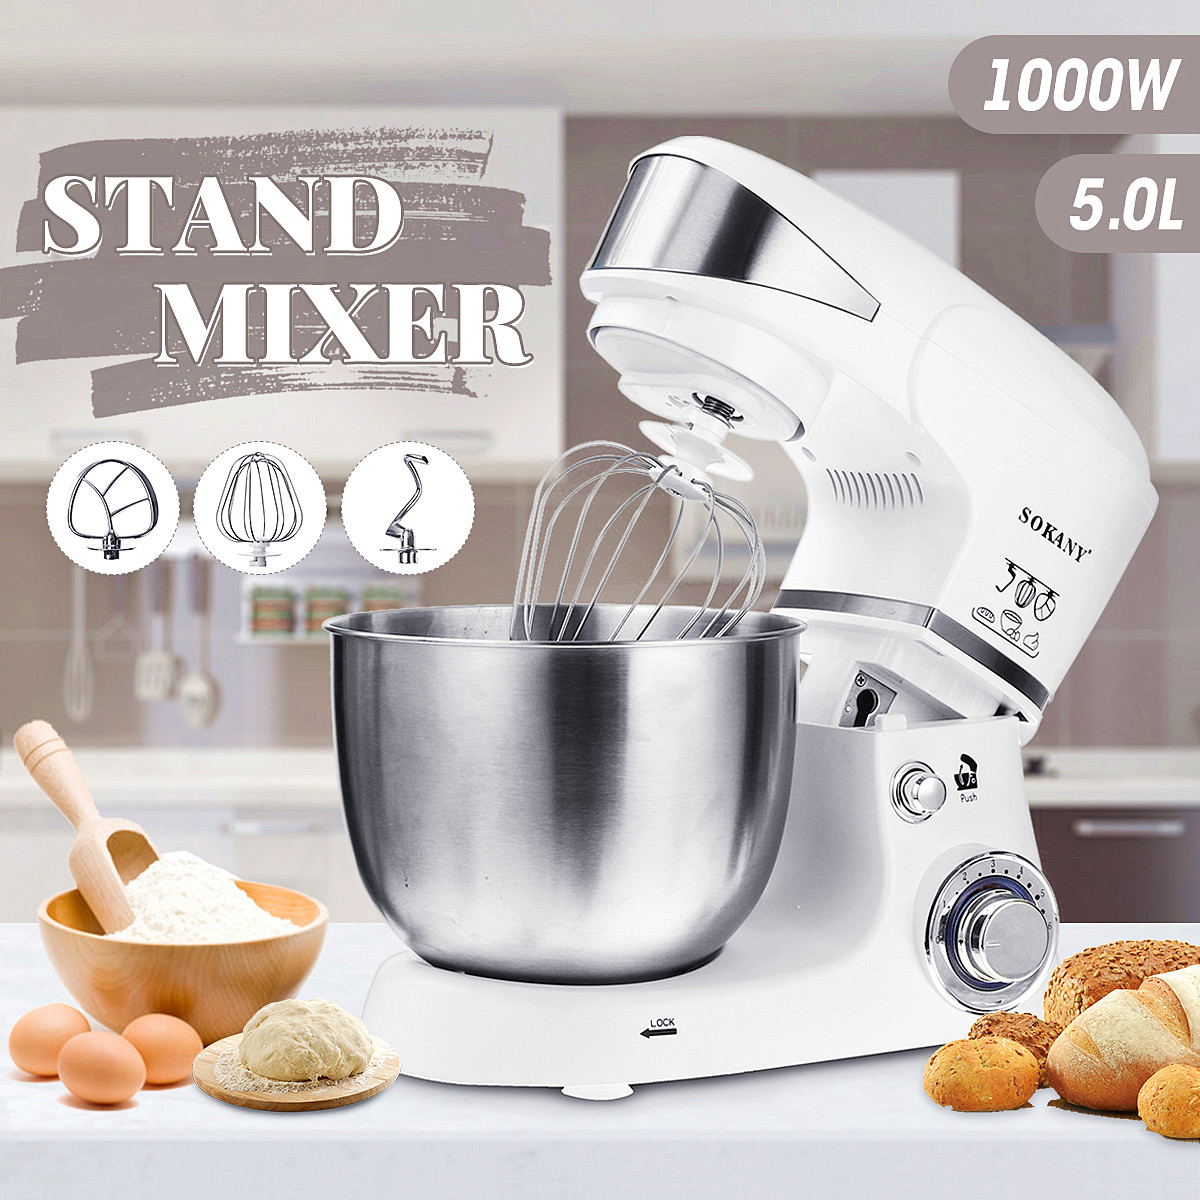 Sokany-220-240V-1000W-5L-Electric-Food-Stand-Mixer-Dough-Hook-Whip-Beater-Whisk-1518605